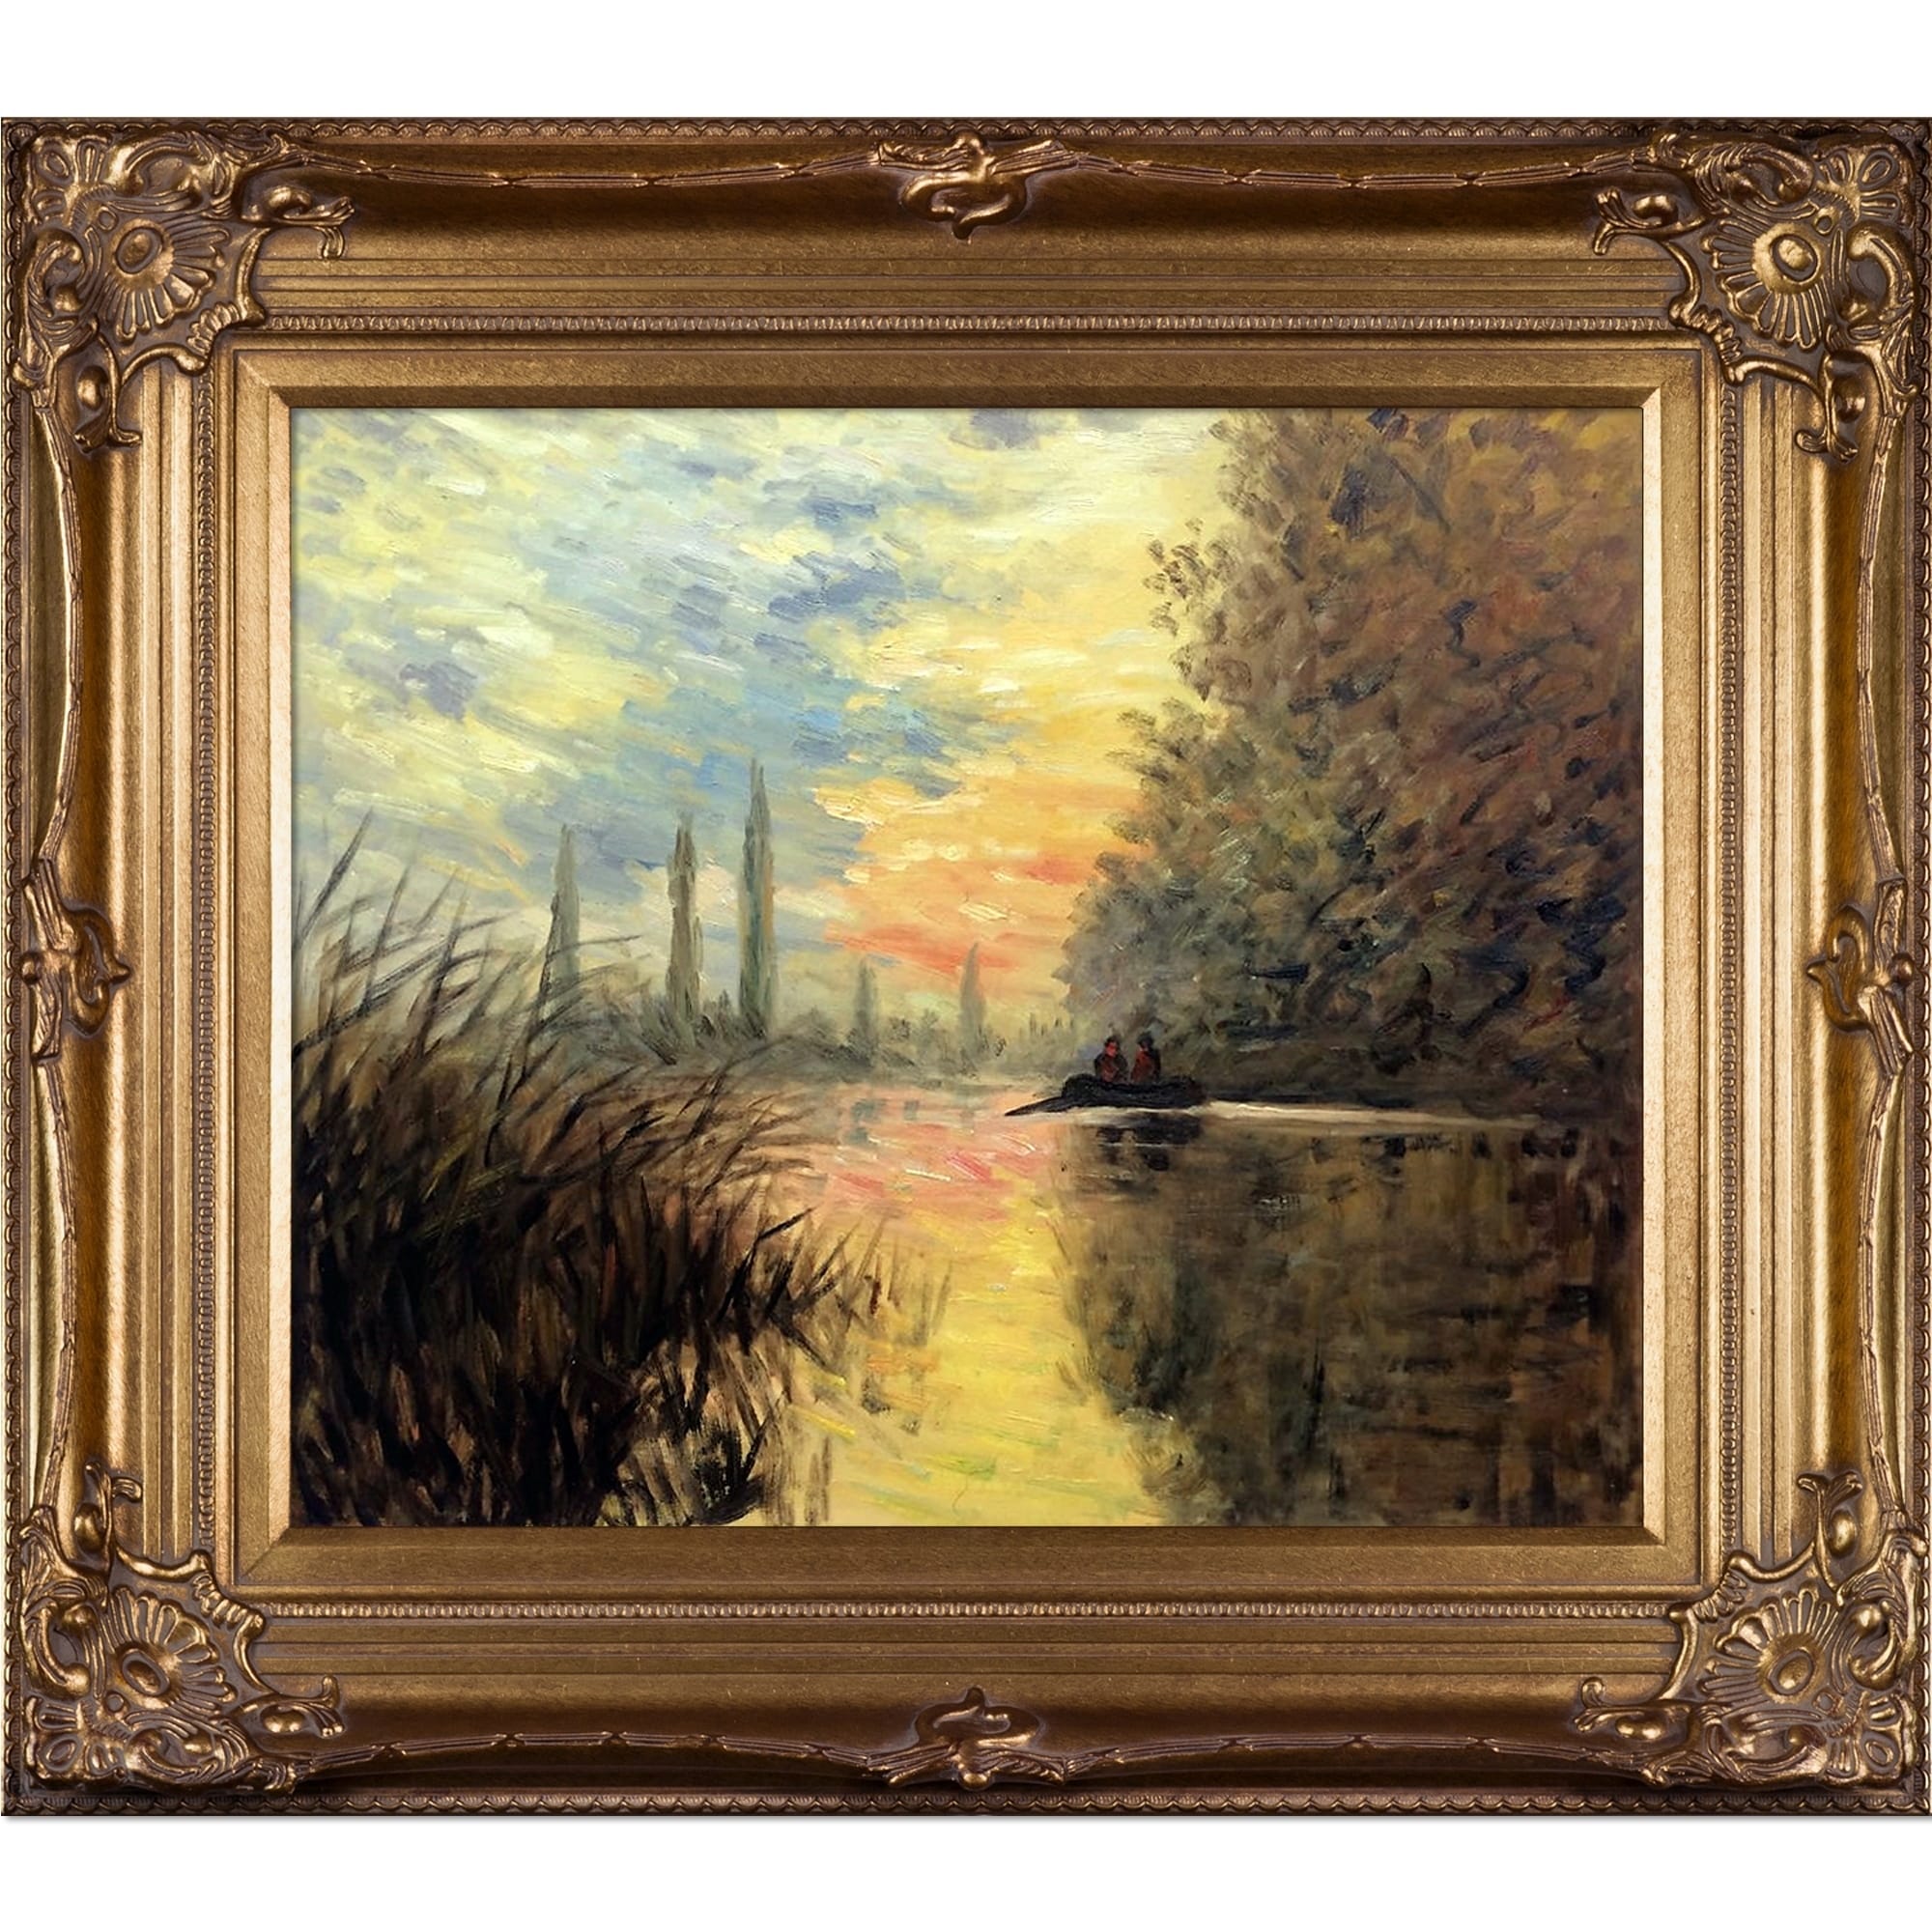 Shop Gracewood Hollow Evening At Argentuil Oil Painting Wall Art With Bronze Frame Overstock 28491745